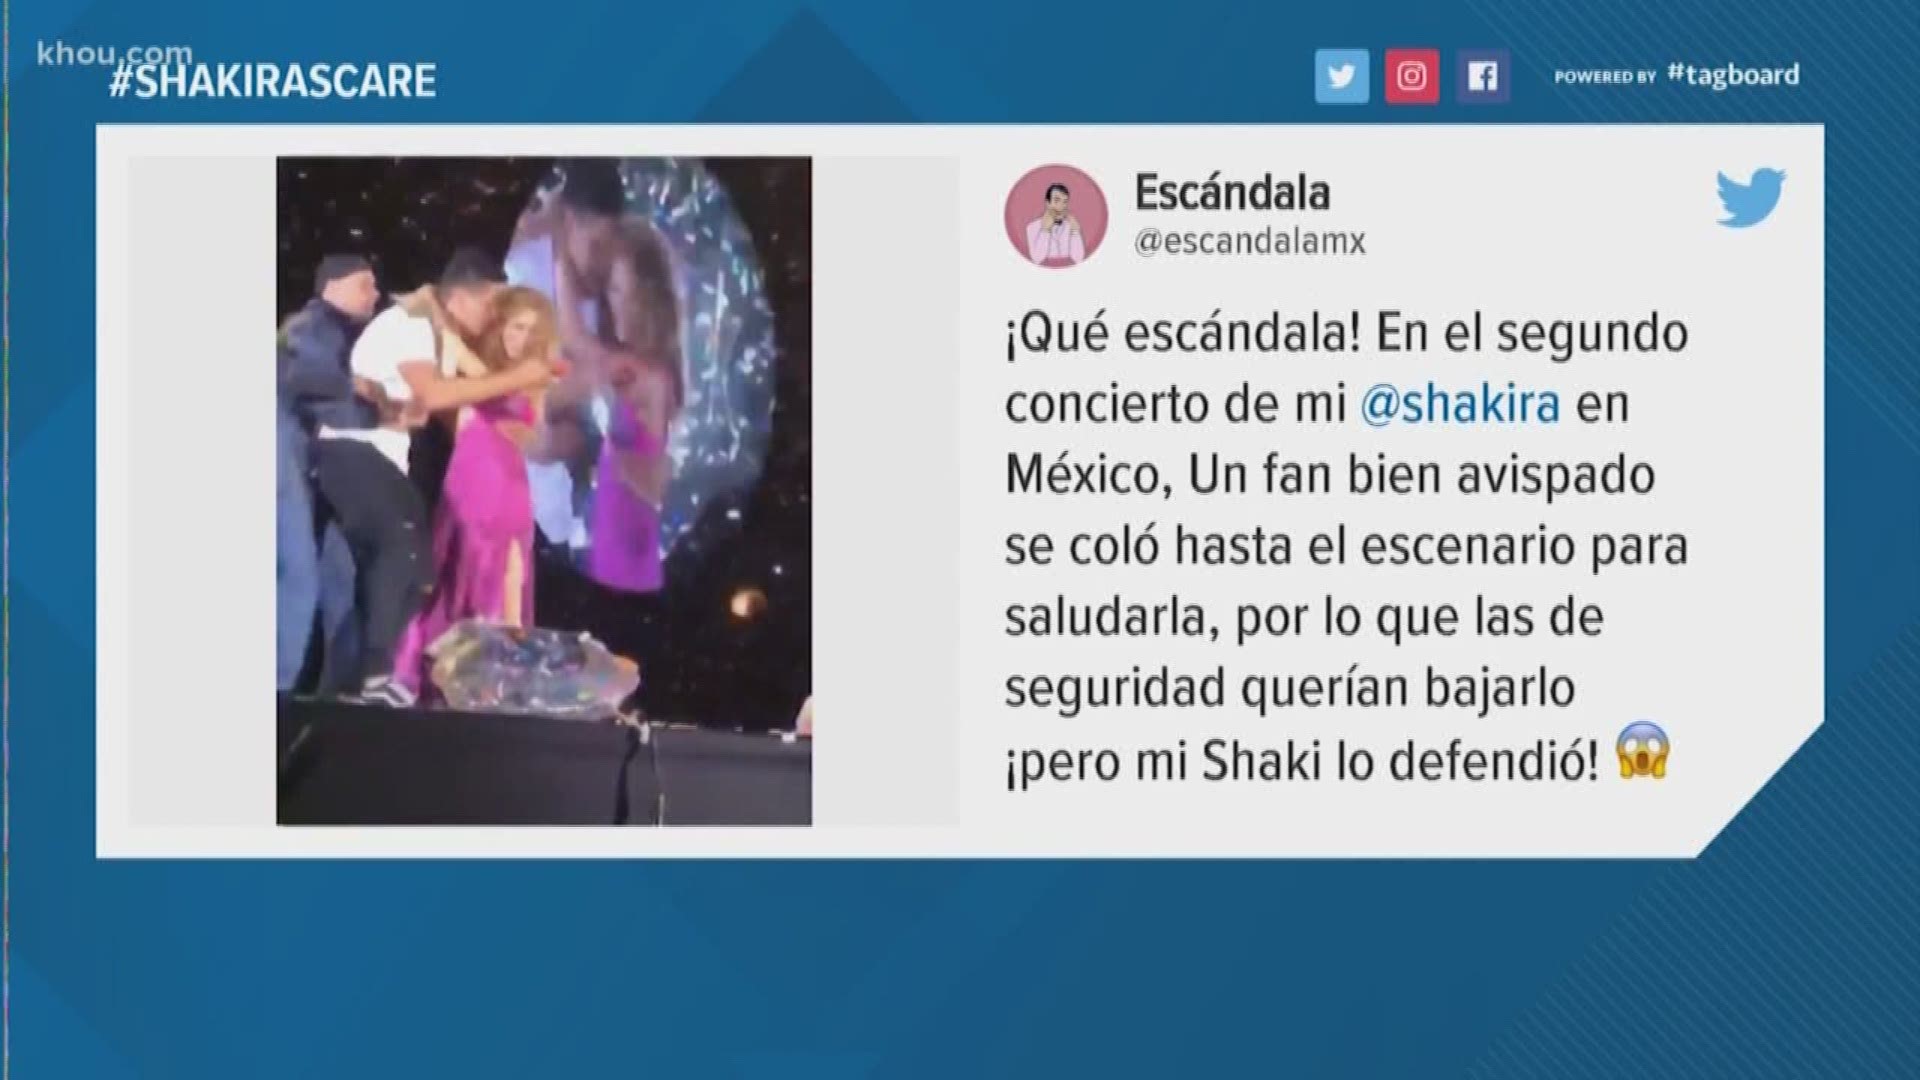 Shakira was in good spirits during her performance in Mexico. A fan jumped on stage to take a picture with her and Shakira was okay with it. 